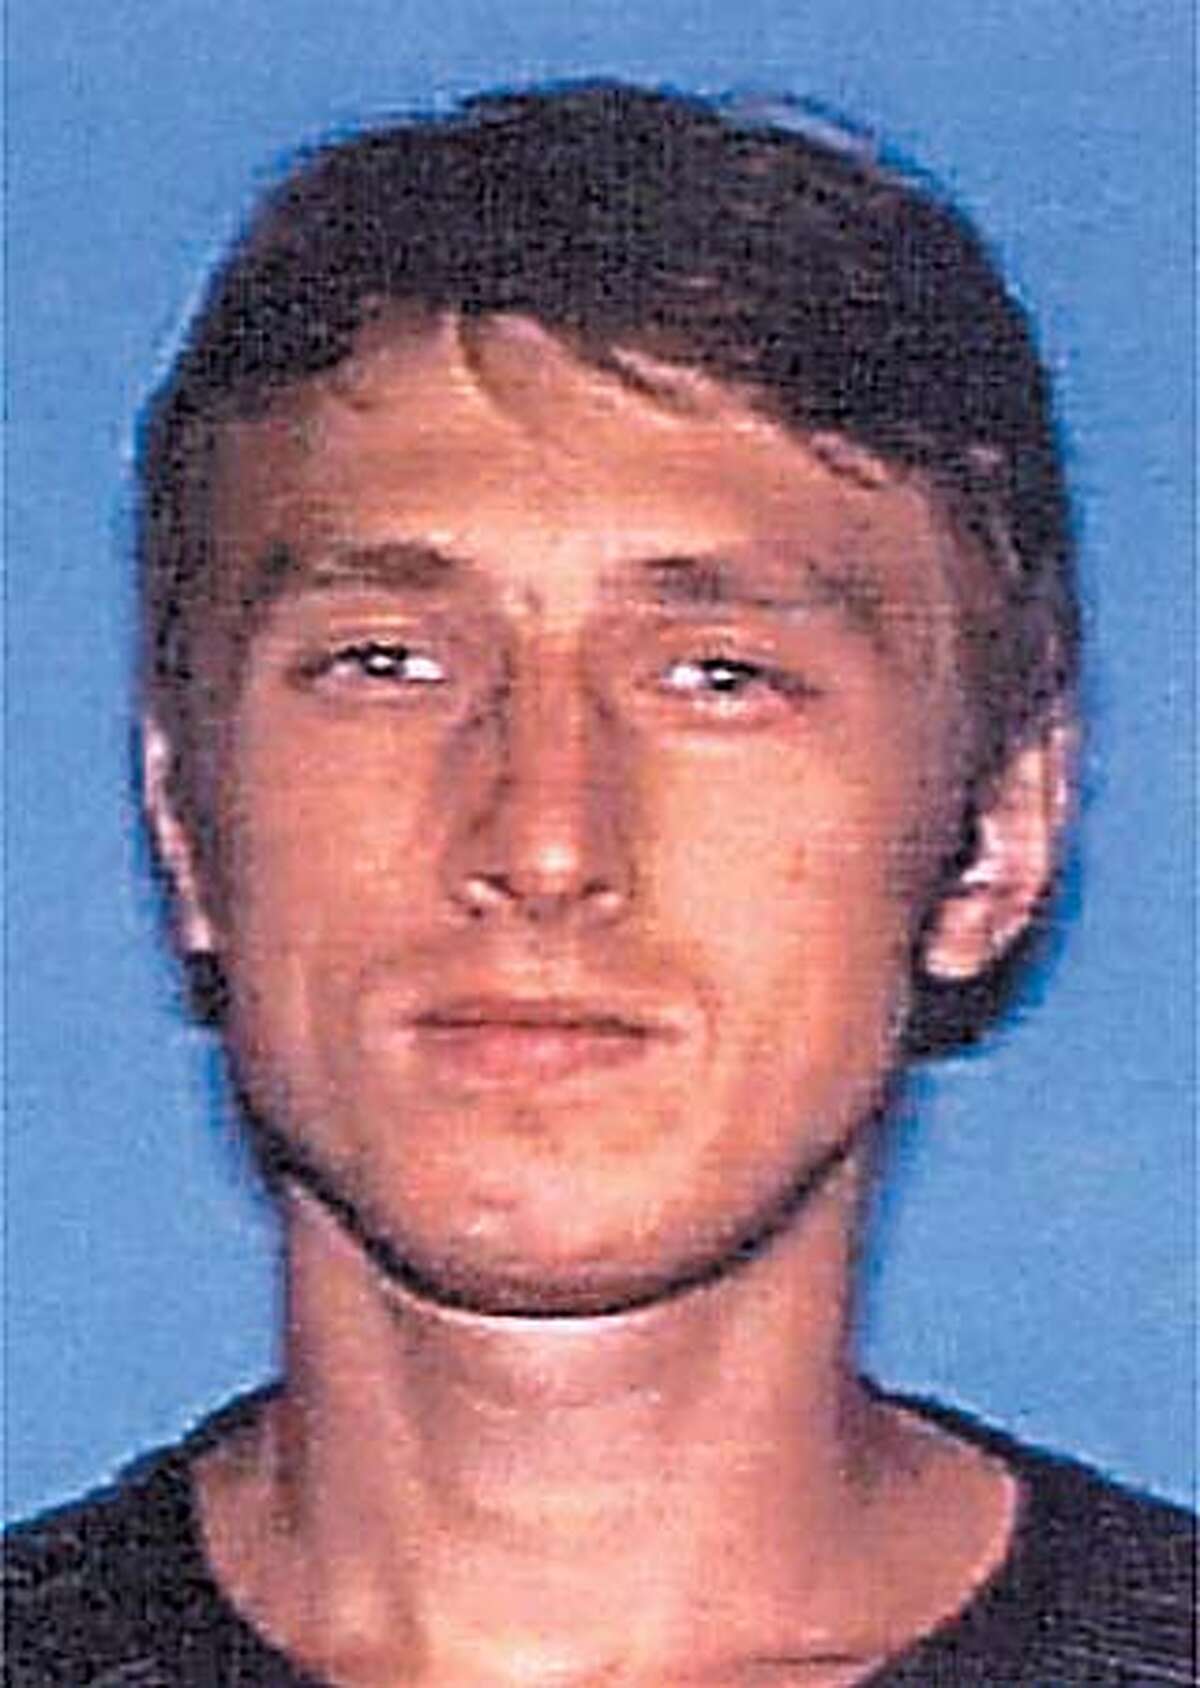 Sacramento County Sheriffs released August 21, 2001 this 'wanted' posted of murder suspect Nikolay Soltys, written with Russian cyrillic script. Police offered a $10,000 reward on Tuesday for information leading to the arrest of an unemployed Ukrainian immigrant suspected of stabbing his pregnant wife to death and murdering four other family members before disappearing with his 3 year old son. QUALITY FROM SOURCE REUTERS/HO